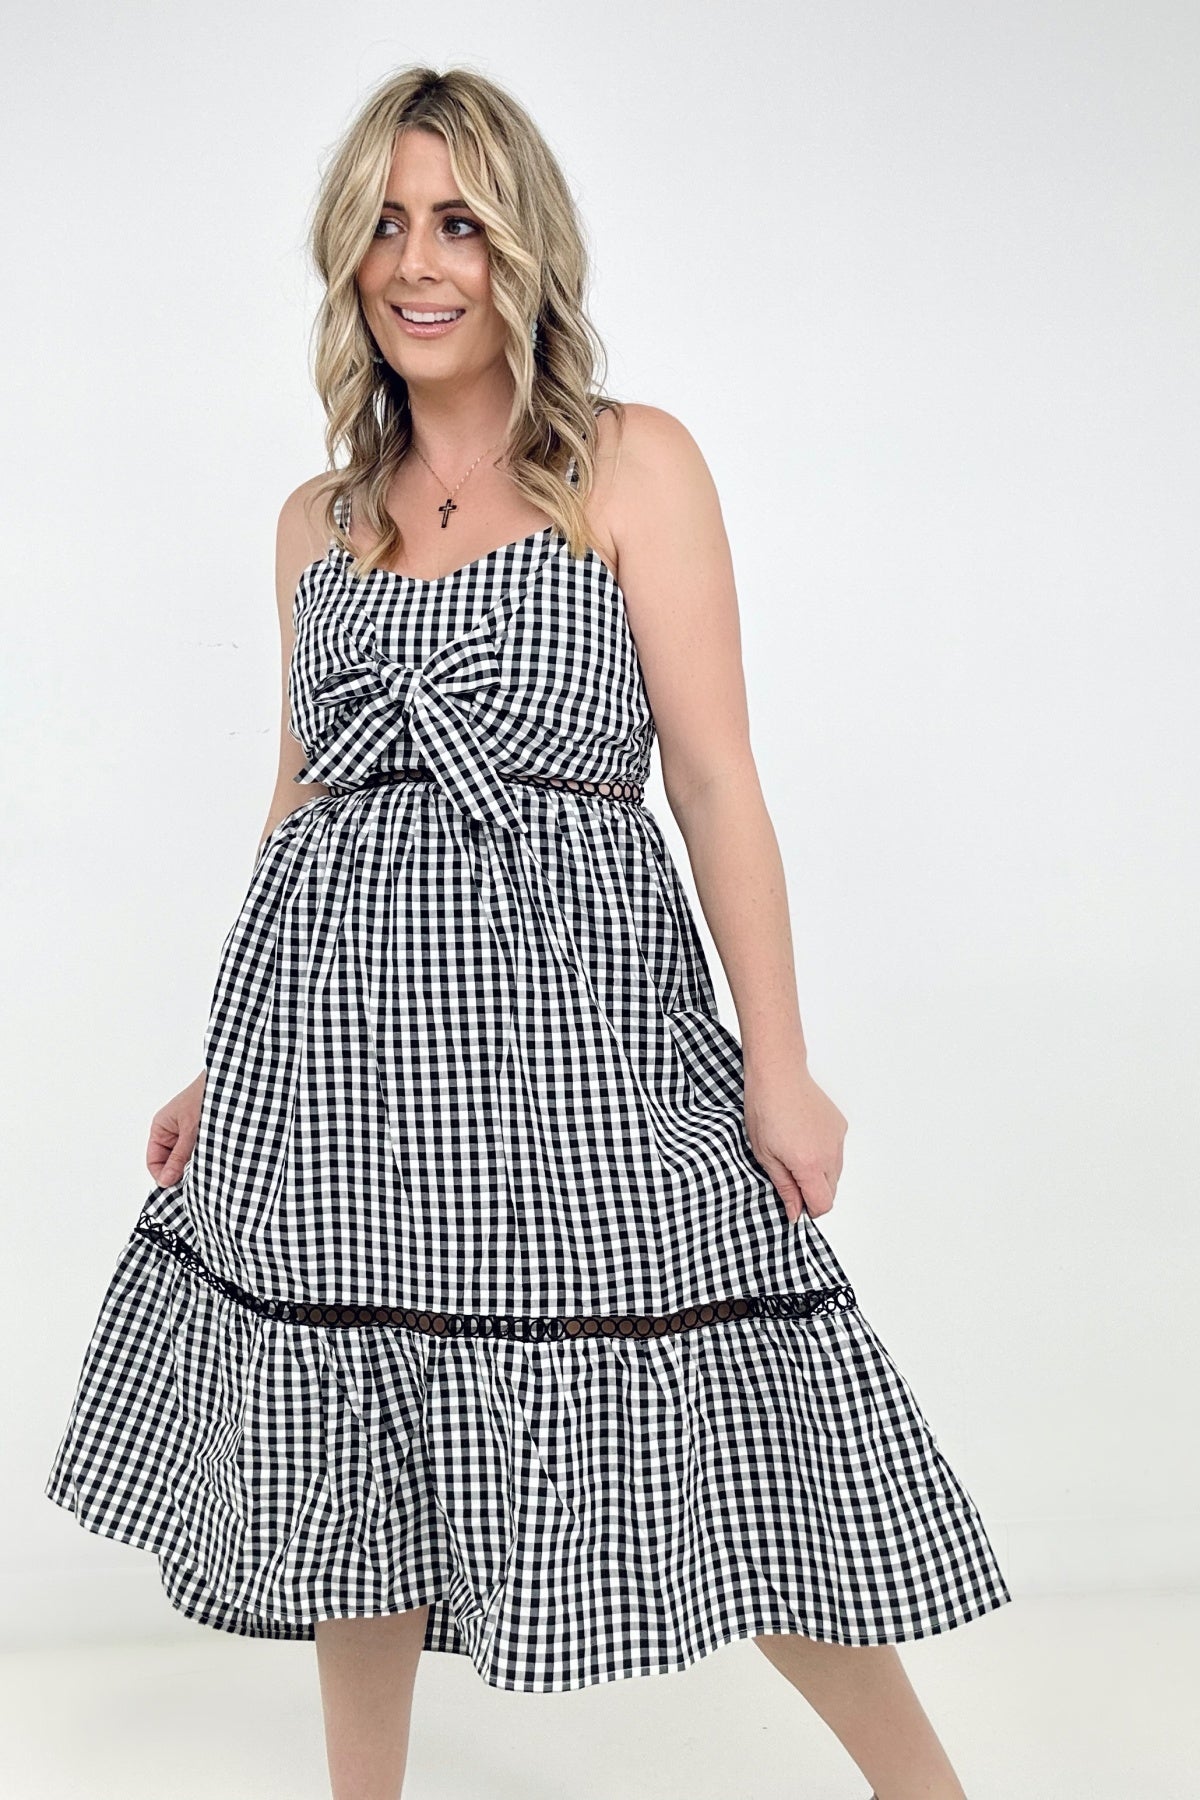 BLACK - White Birch Sleeveless Plaid Woven Dress - Ships from The US - Womens Midi Dresses at TFC&H Co.